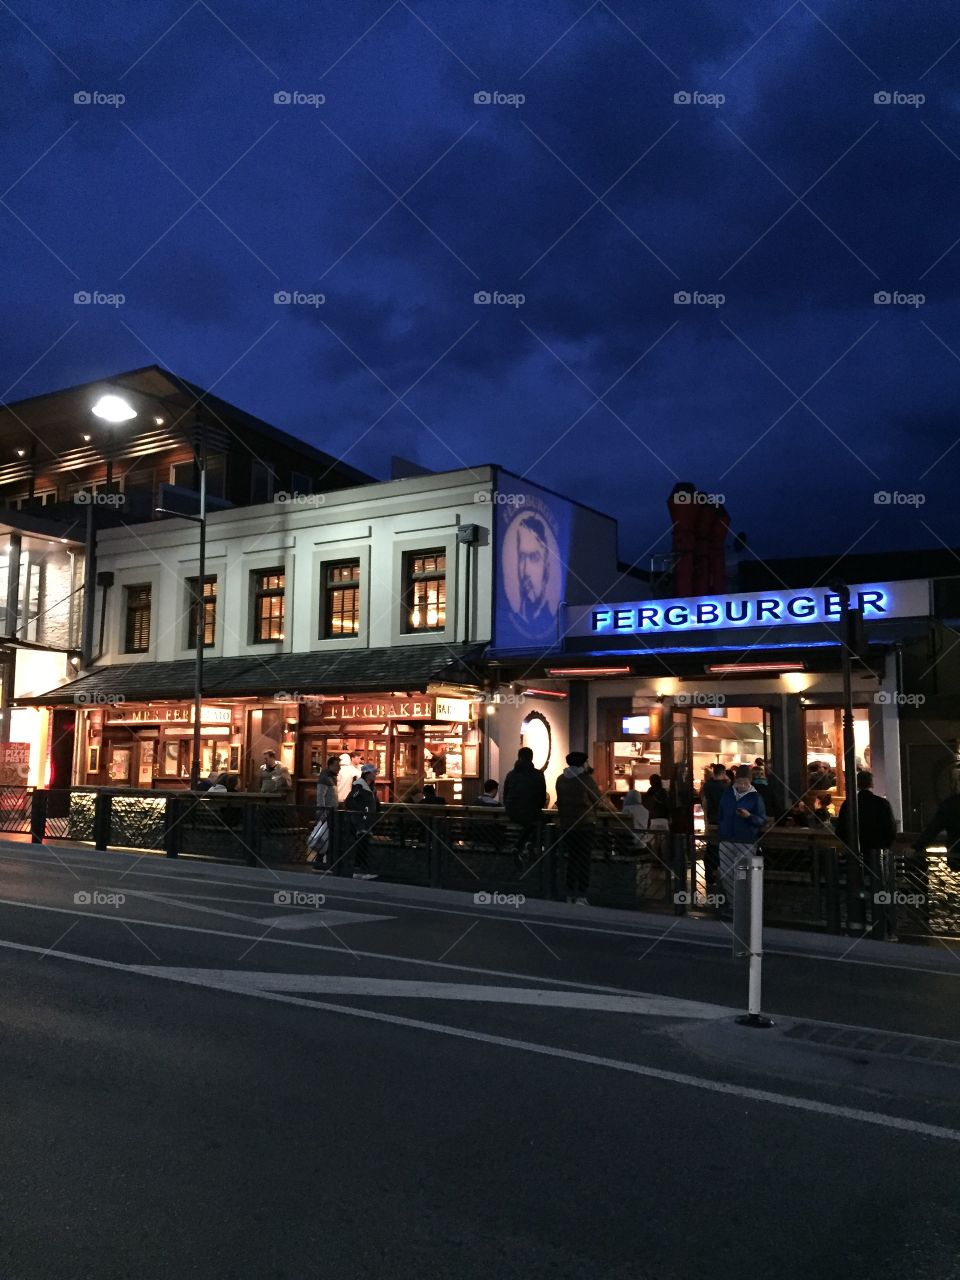 Fergburger and Ferg Bakery at night in Queenstown